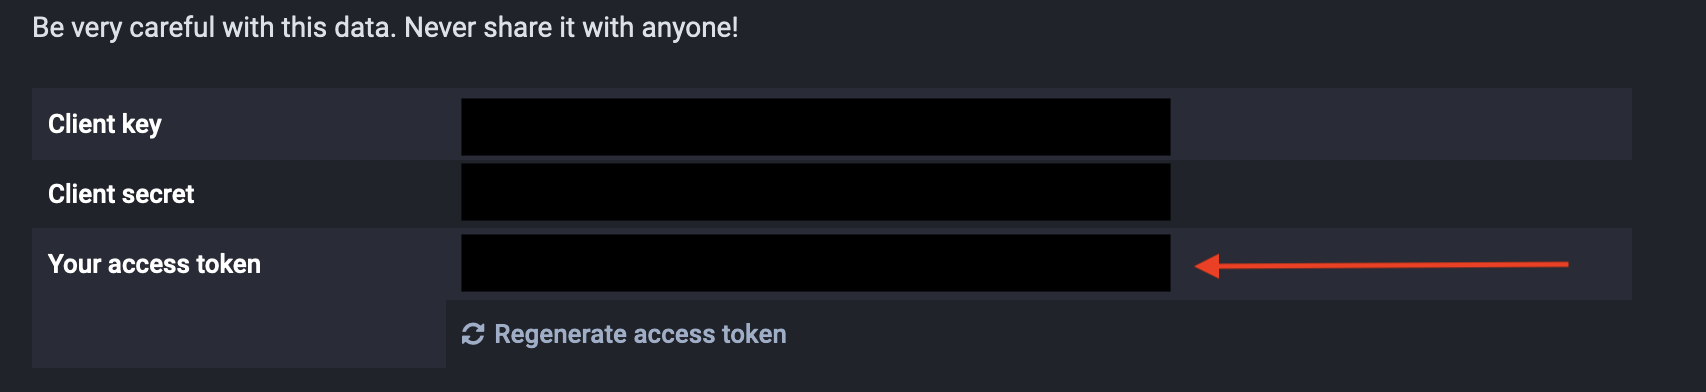 A screenshot with an arrow pointing at the value for the “Your access token” field